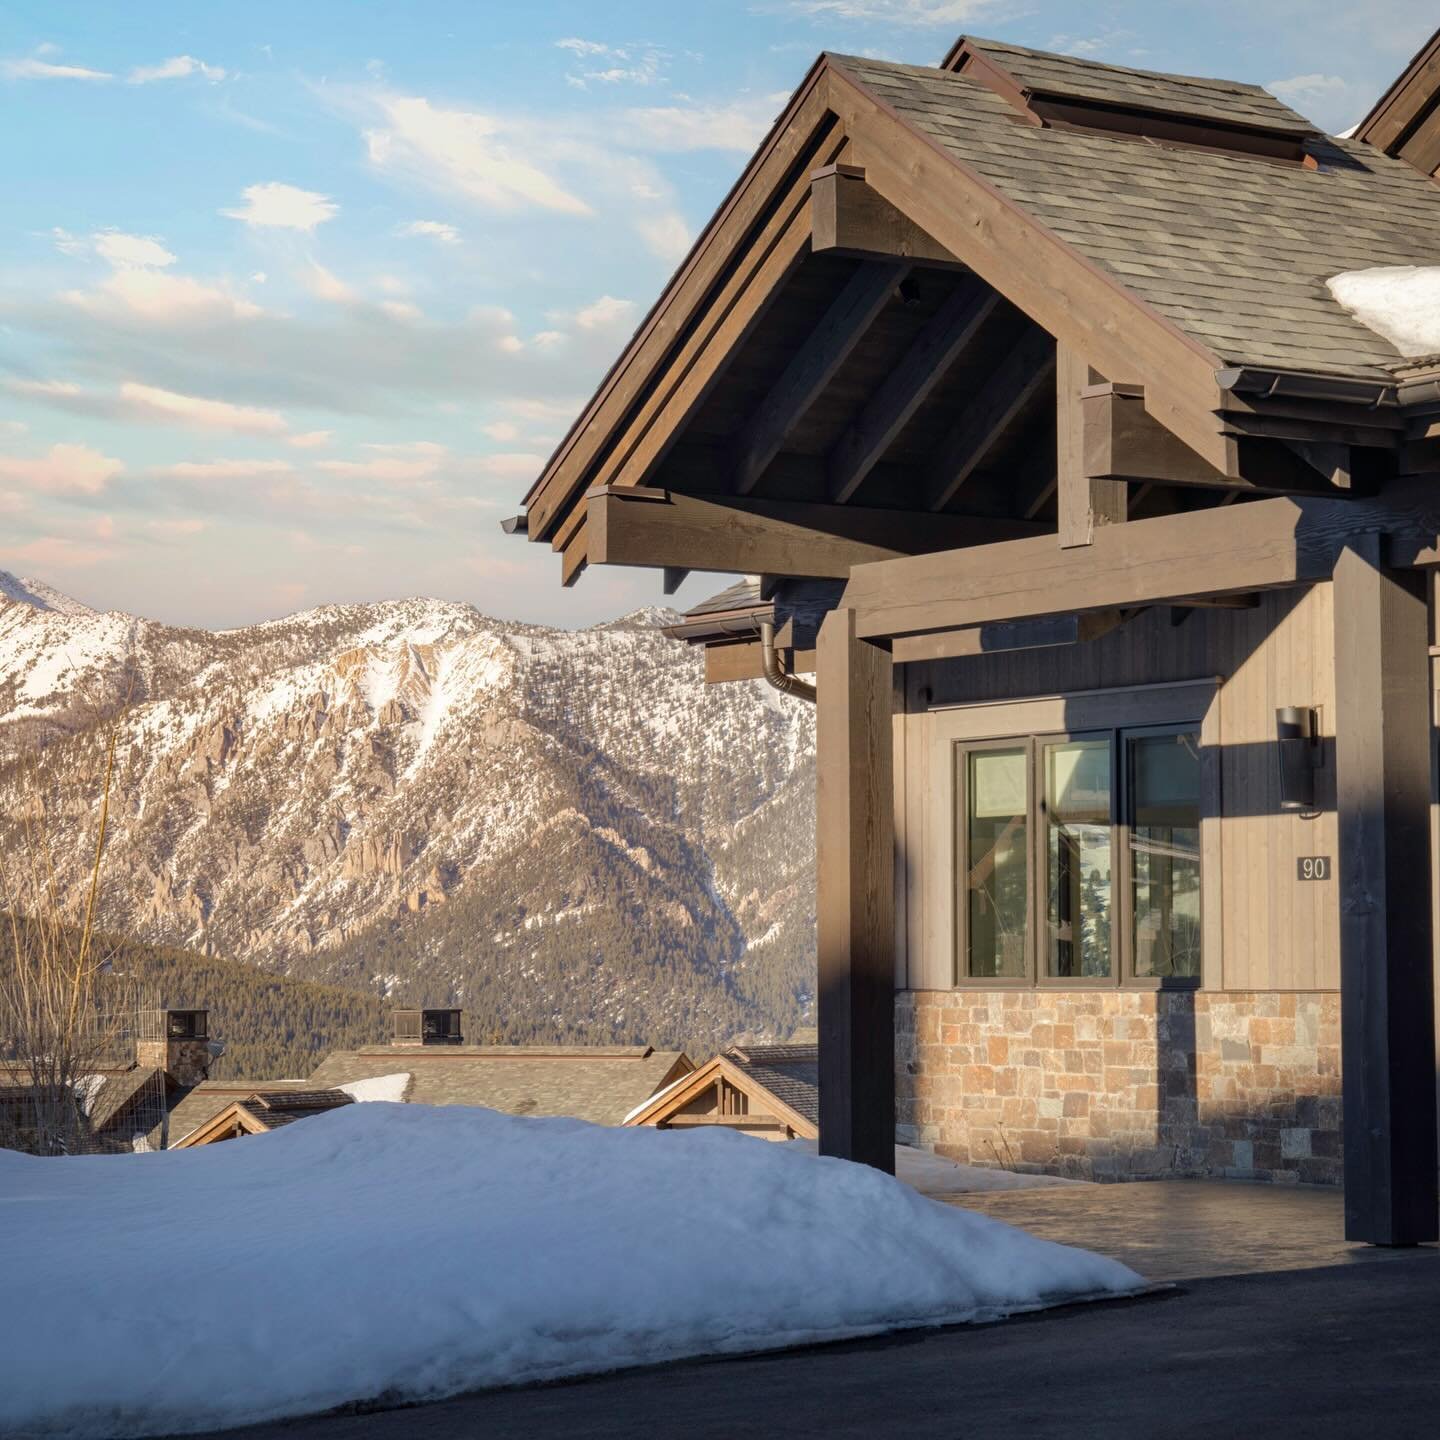 Being in a Mountain home is an unbeatable feeling. Something about being surrounded by trees and bringing the magic of Montana inside makes this home truly shine. This project was a labor of love and seeing it all come together is rewarding beyond be